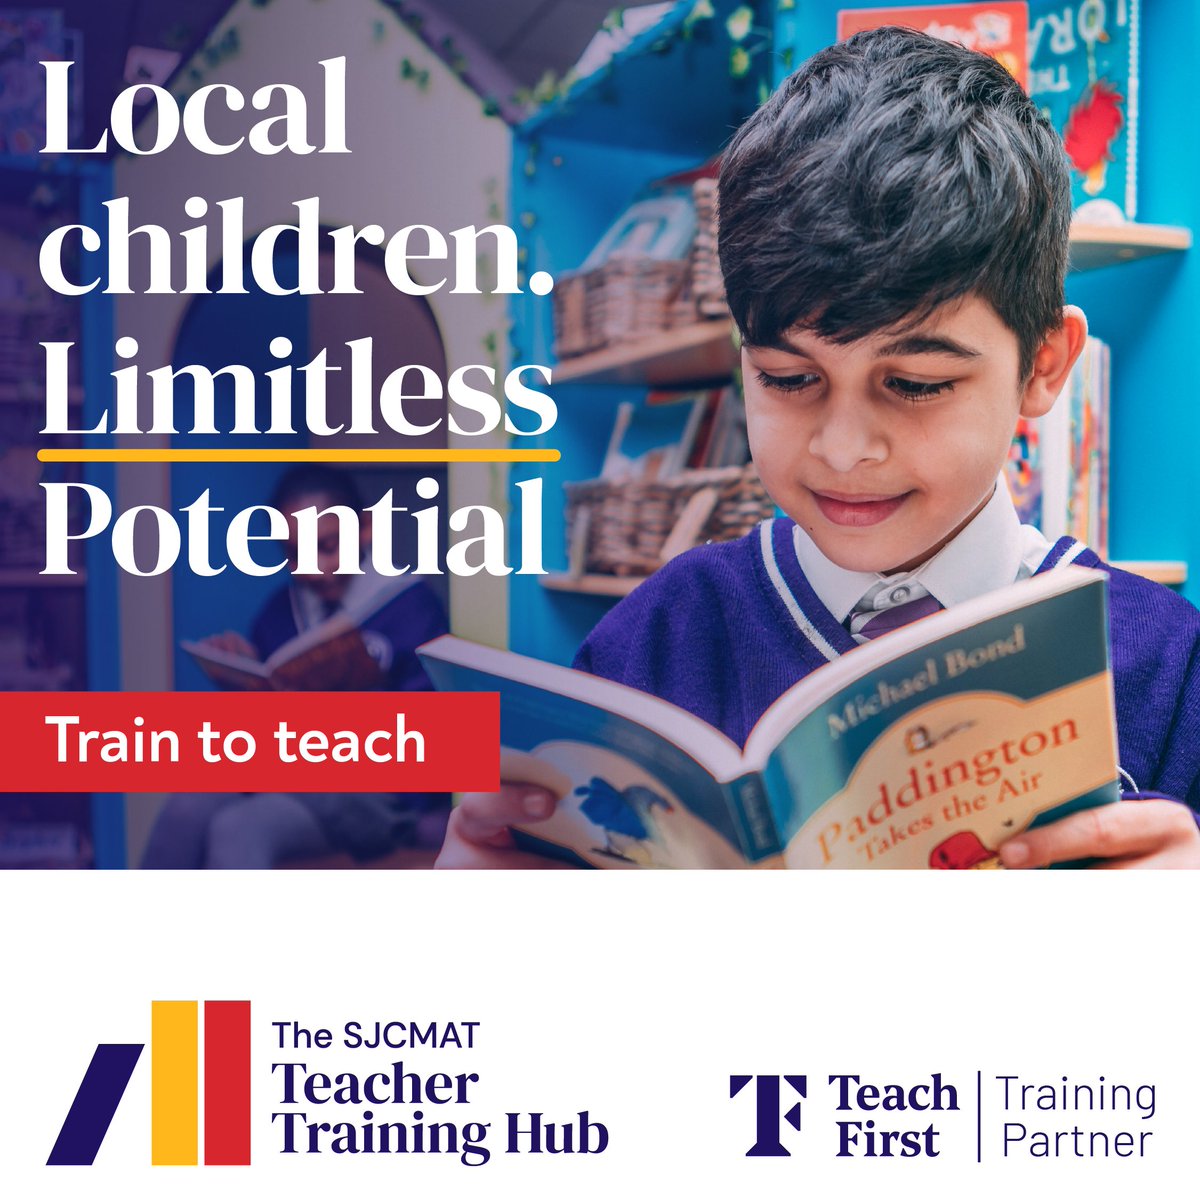 Local children need teachers who can inspire them. Join a school near you and become a qualified teacher in just one year with our Teacher Training Hub. Learn from the experts while gaining hands-on experience and teaching skills: bit.ly/3wsZZxy